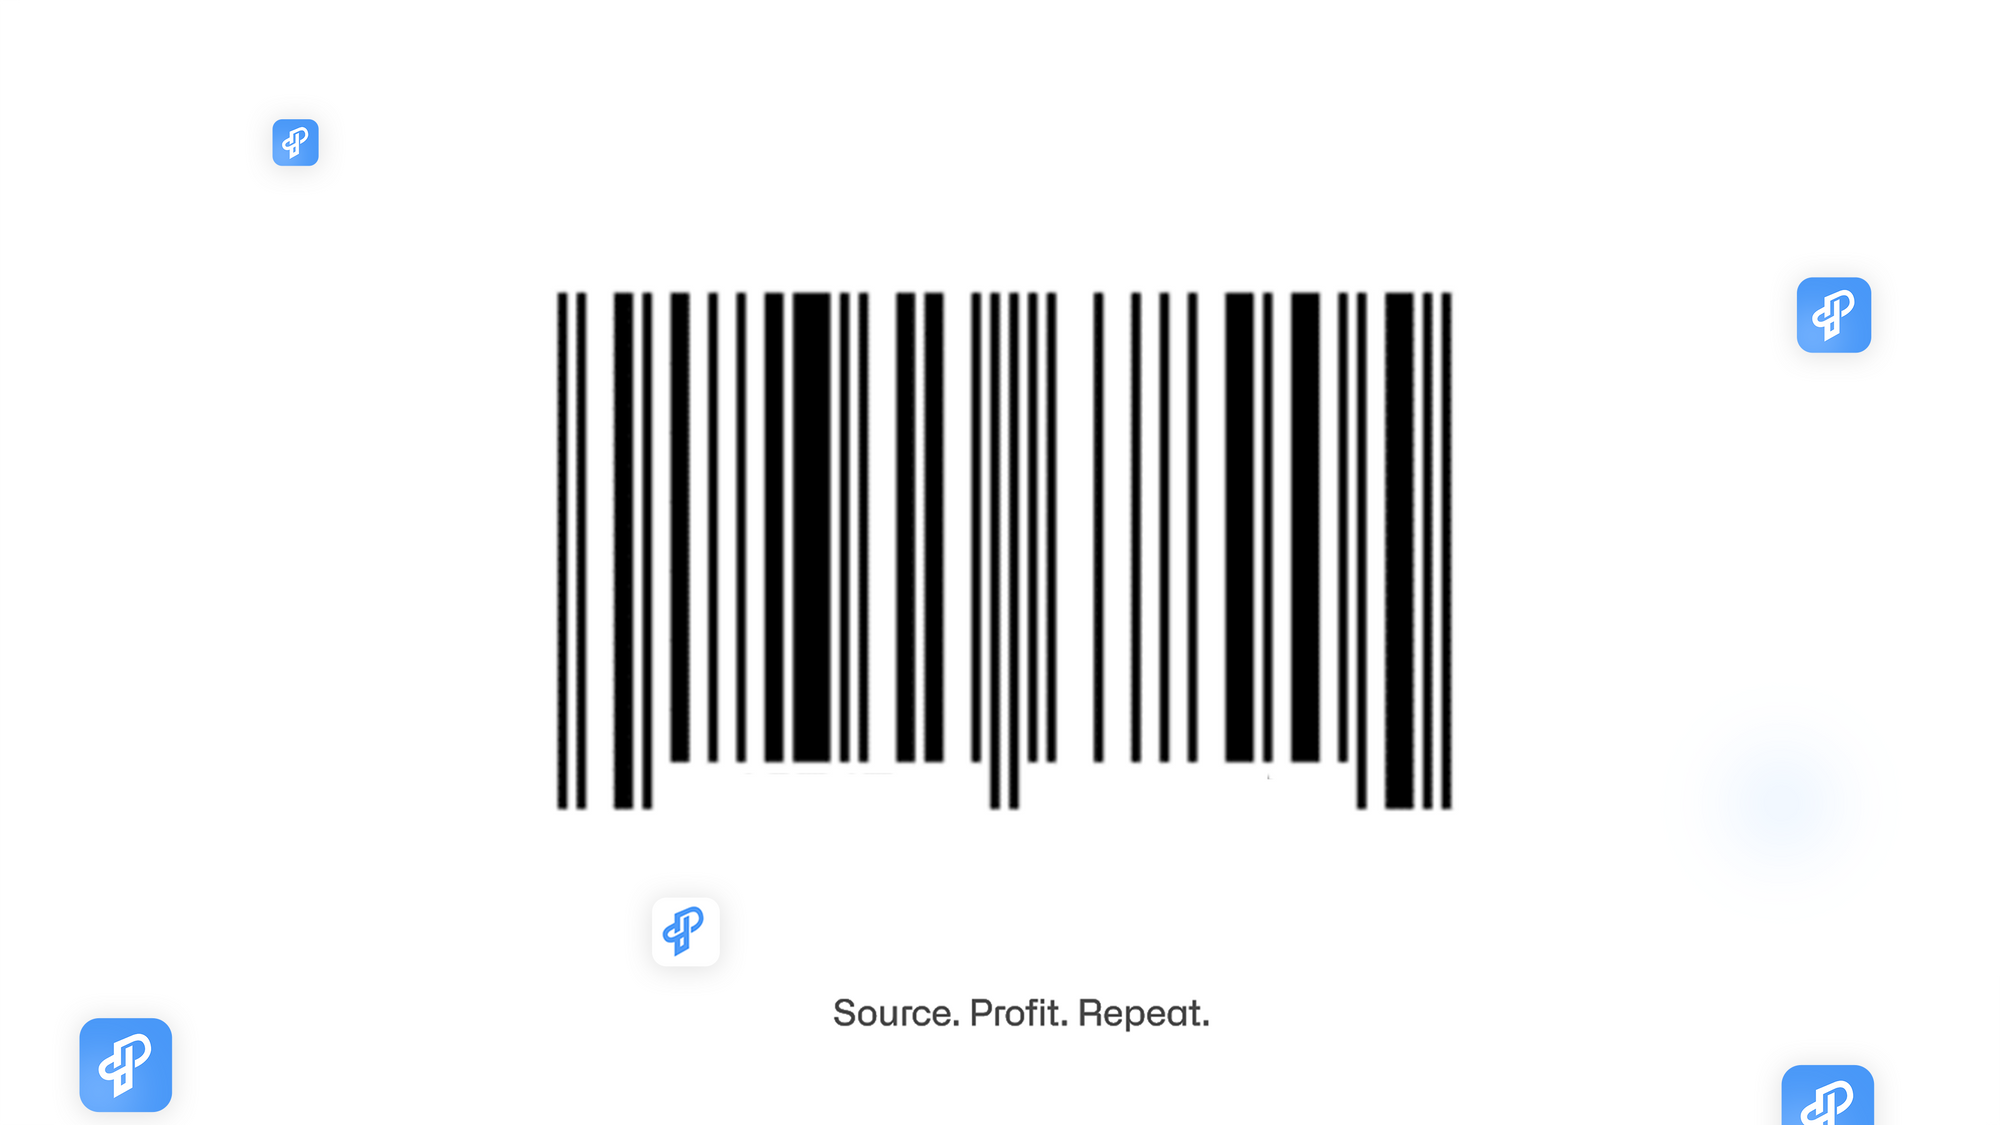 What do we use barcodes for on Amazon, what exactly are barcodes and what types are there? UPC, ISBN, ASIN, EAN, FNSKU, GTIN